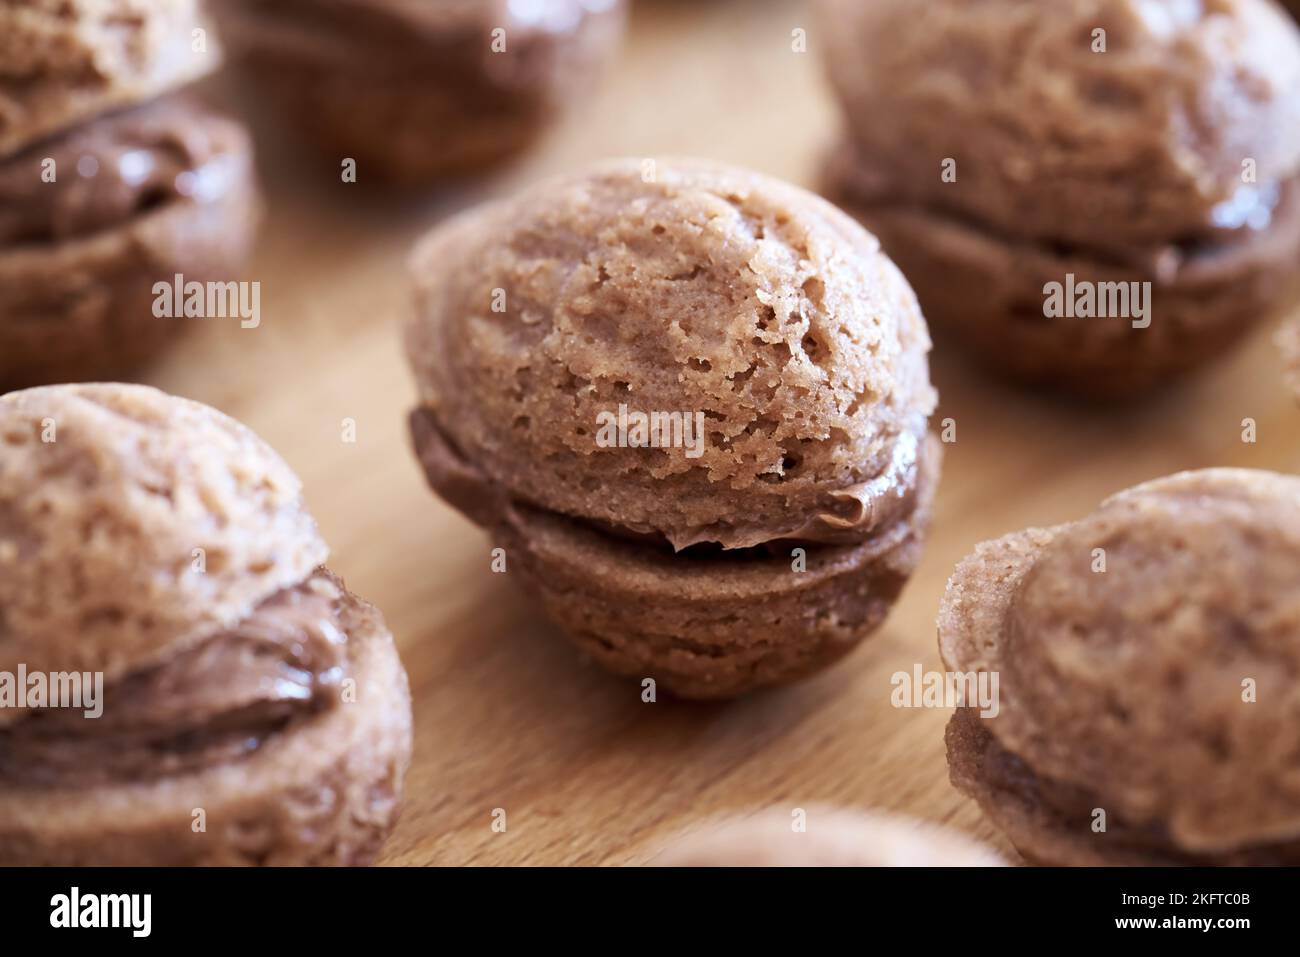 https://c8.alamy.com/comp/2KFTC0B/homemade-christmas-cocoa-cookies-in-the-form-of-nuts-filled-with-chocolate-cream-close-up-2KFTC0B.jpg